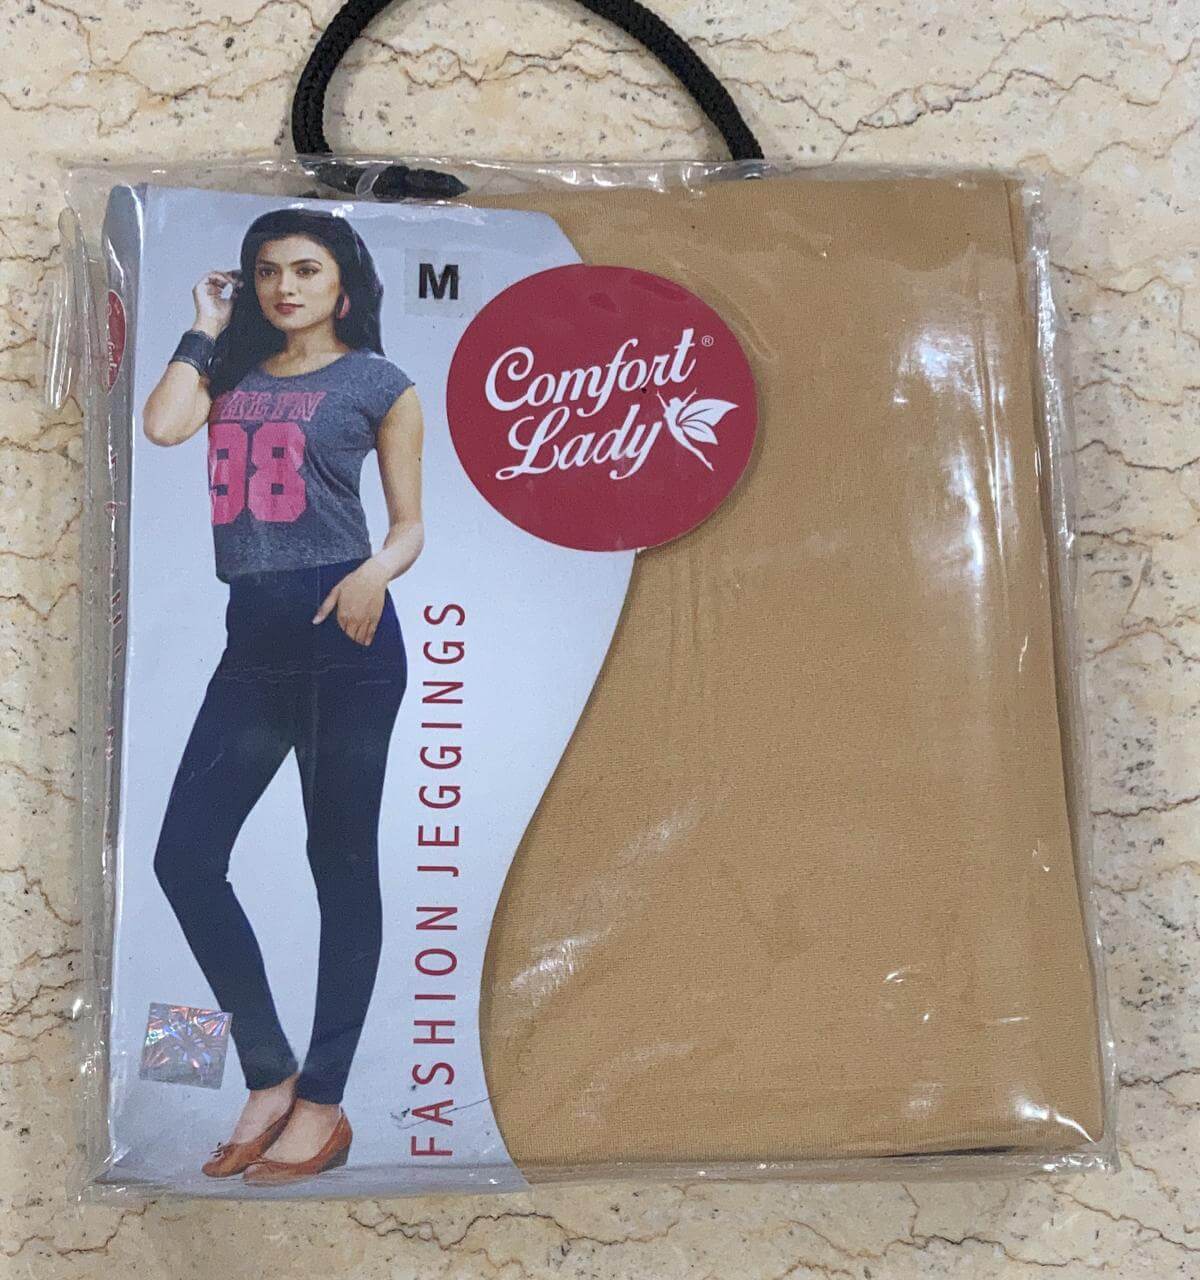 Unboxing & Review of Comfort Lady Kurti Pants l Comfort Lady Lenggis l Not  for Wholesale. - YouTube